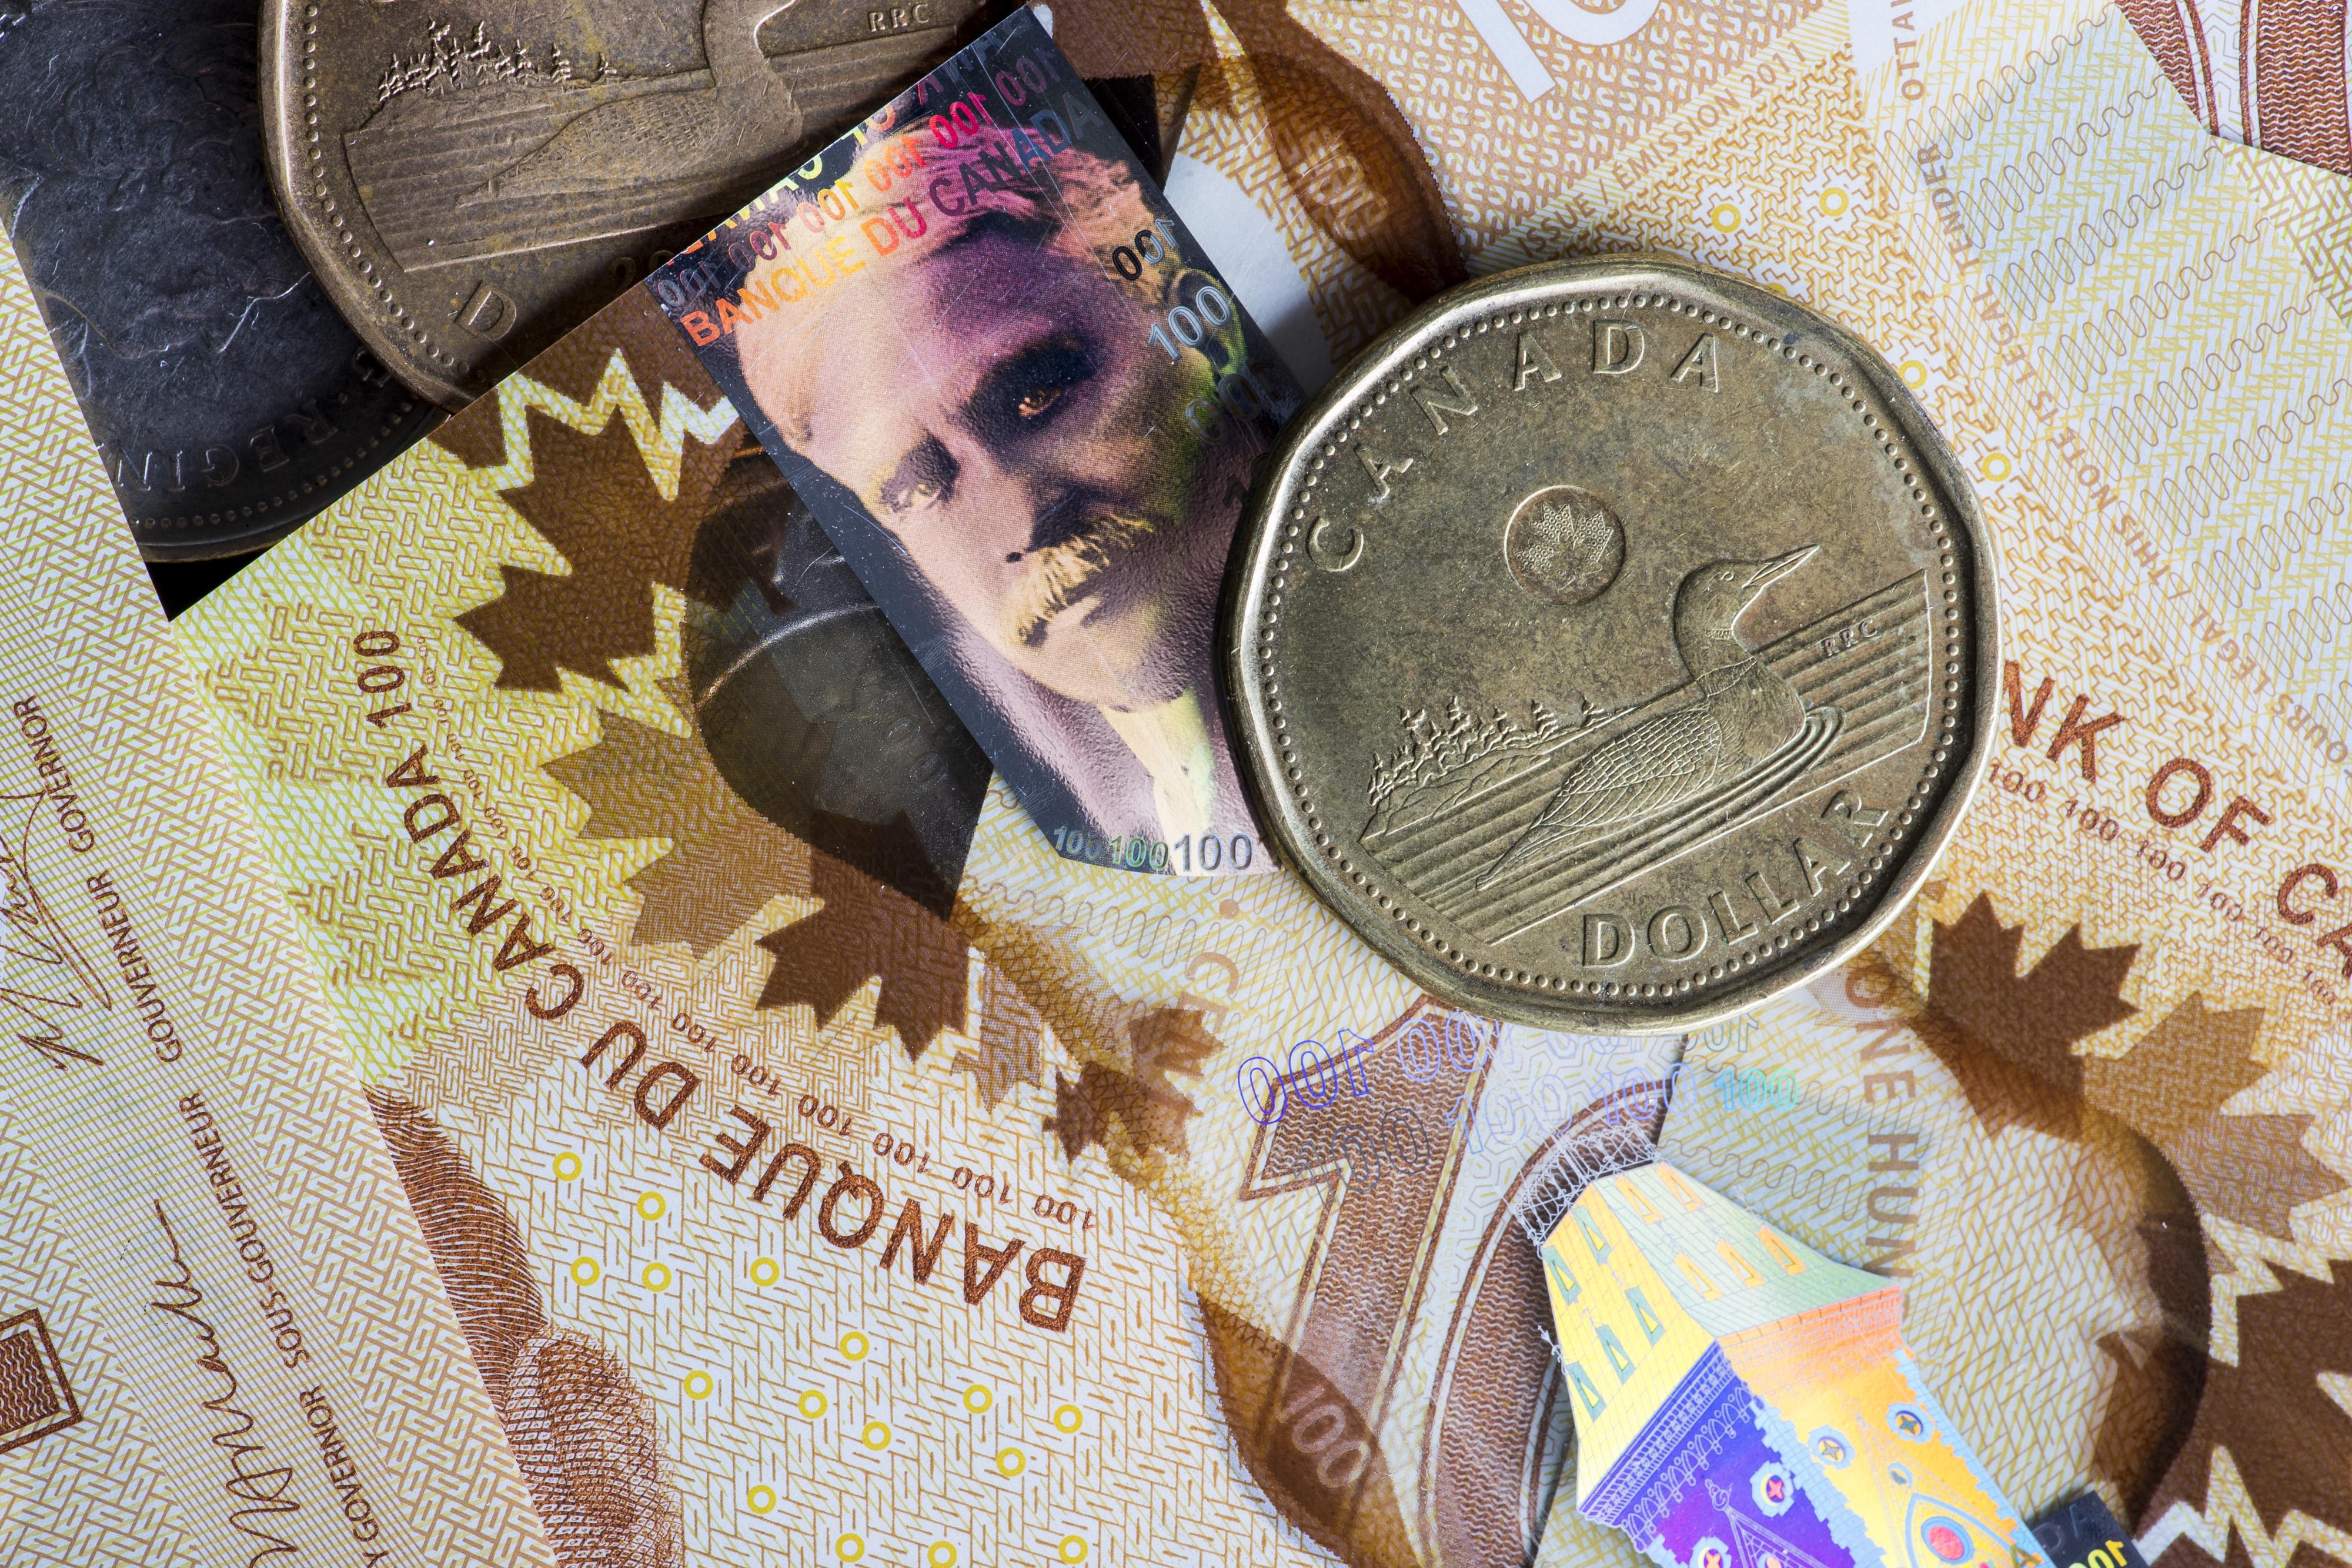 Image of Canadian dollar on background of Canadian flag